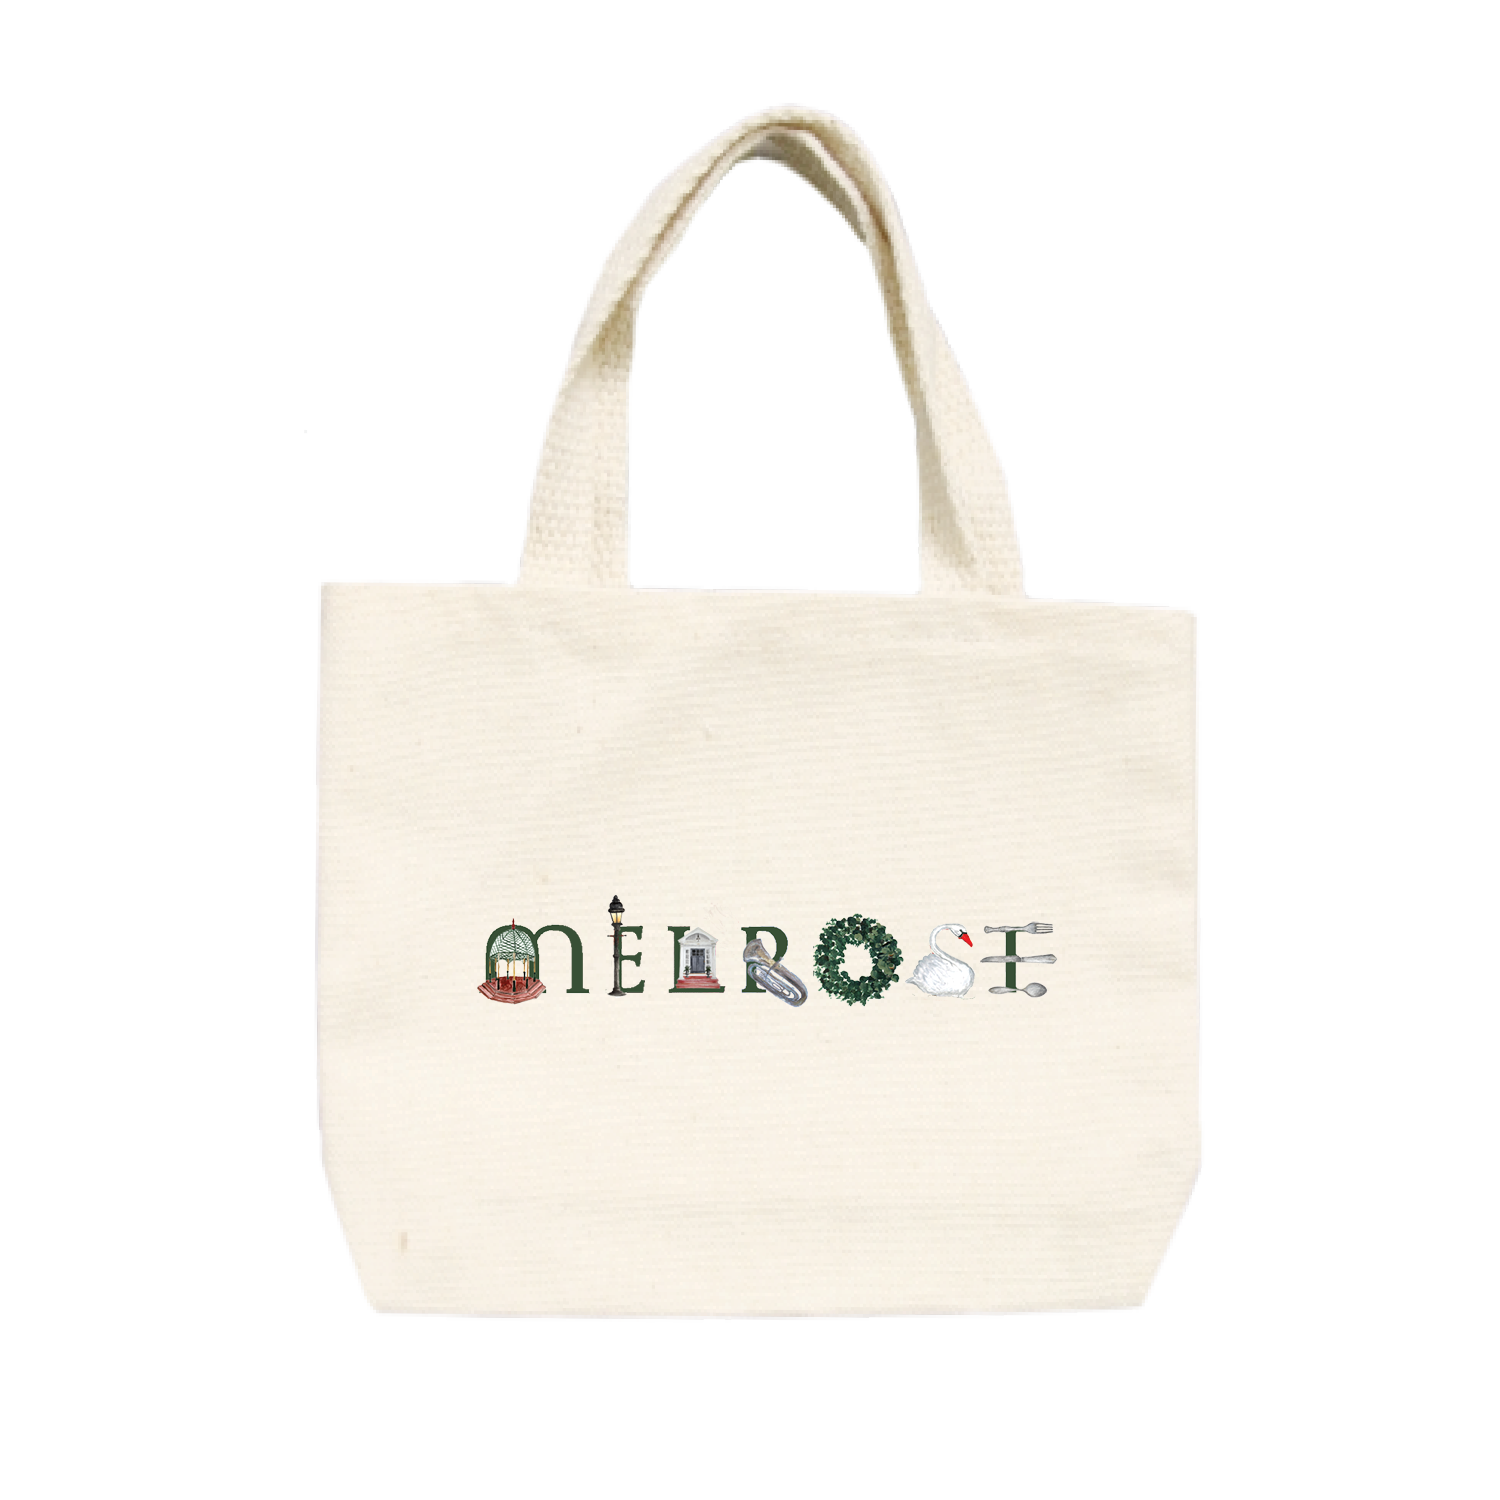 Melrose small tote